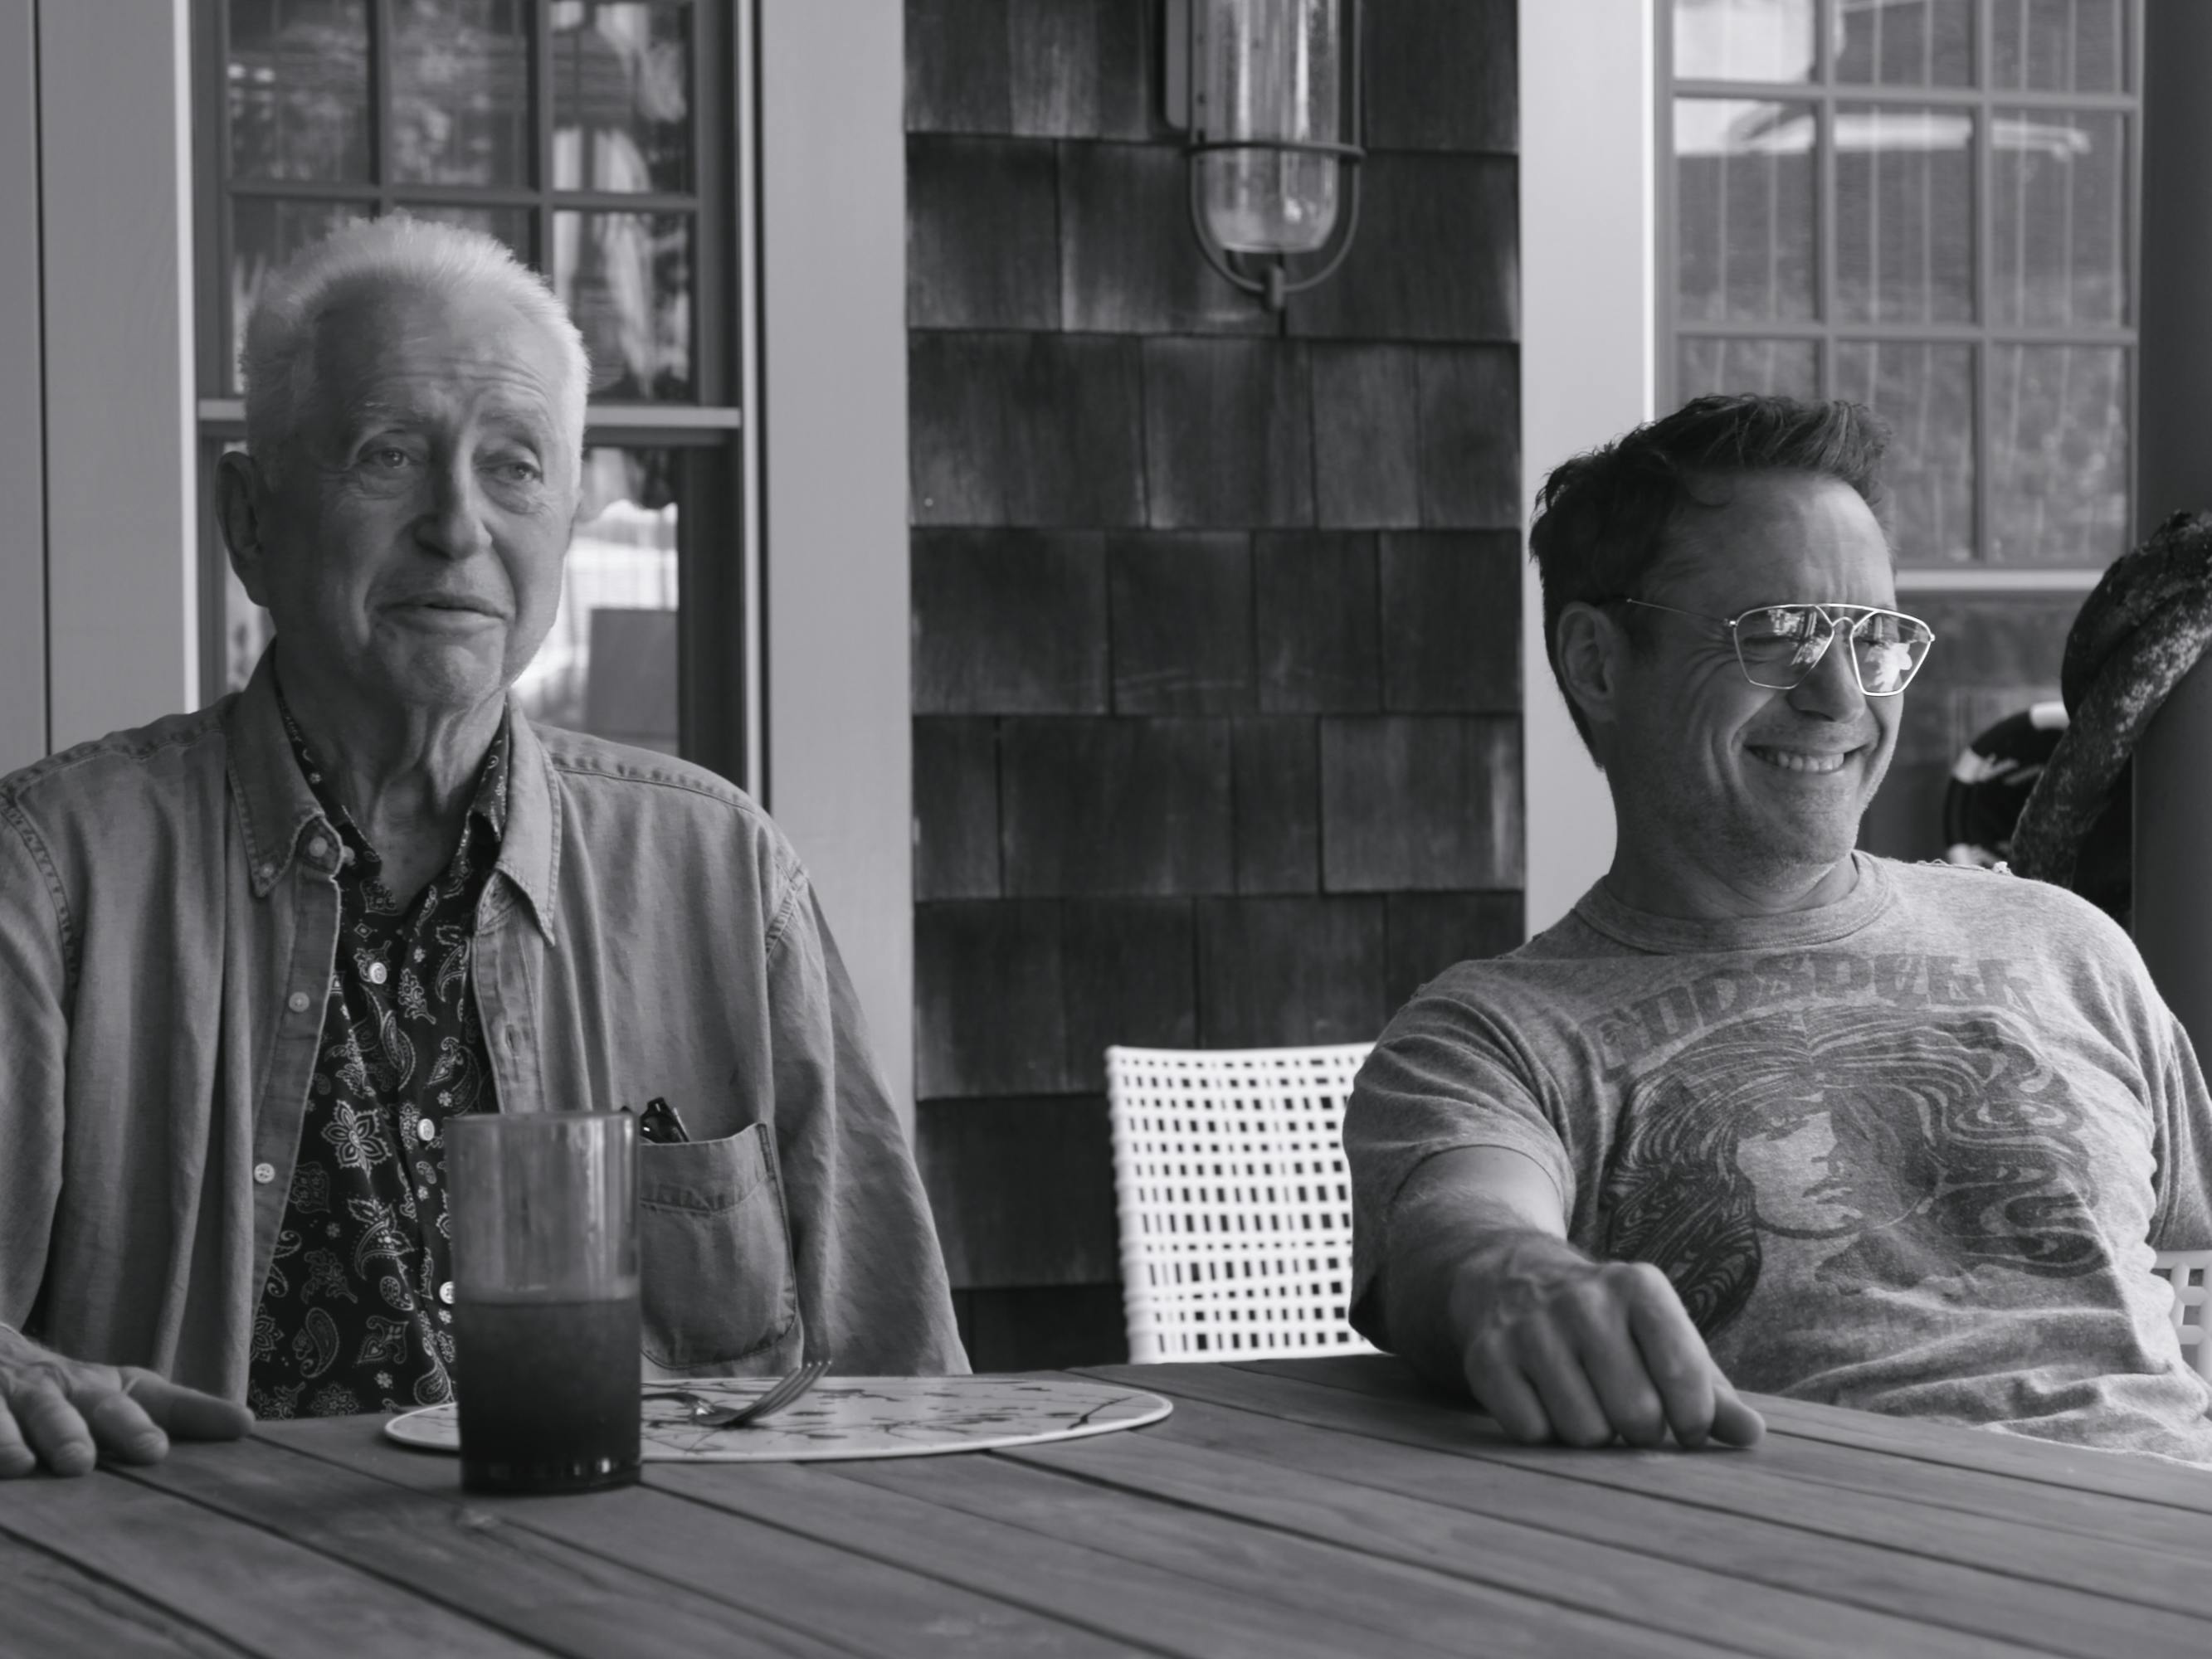 Robert Downey Sr. and Robert Downey Jr. sit together at a wooden table smiling and laughing.